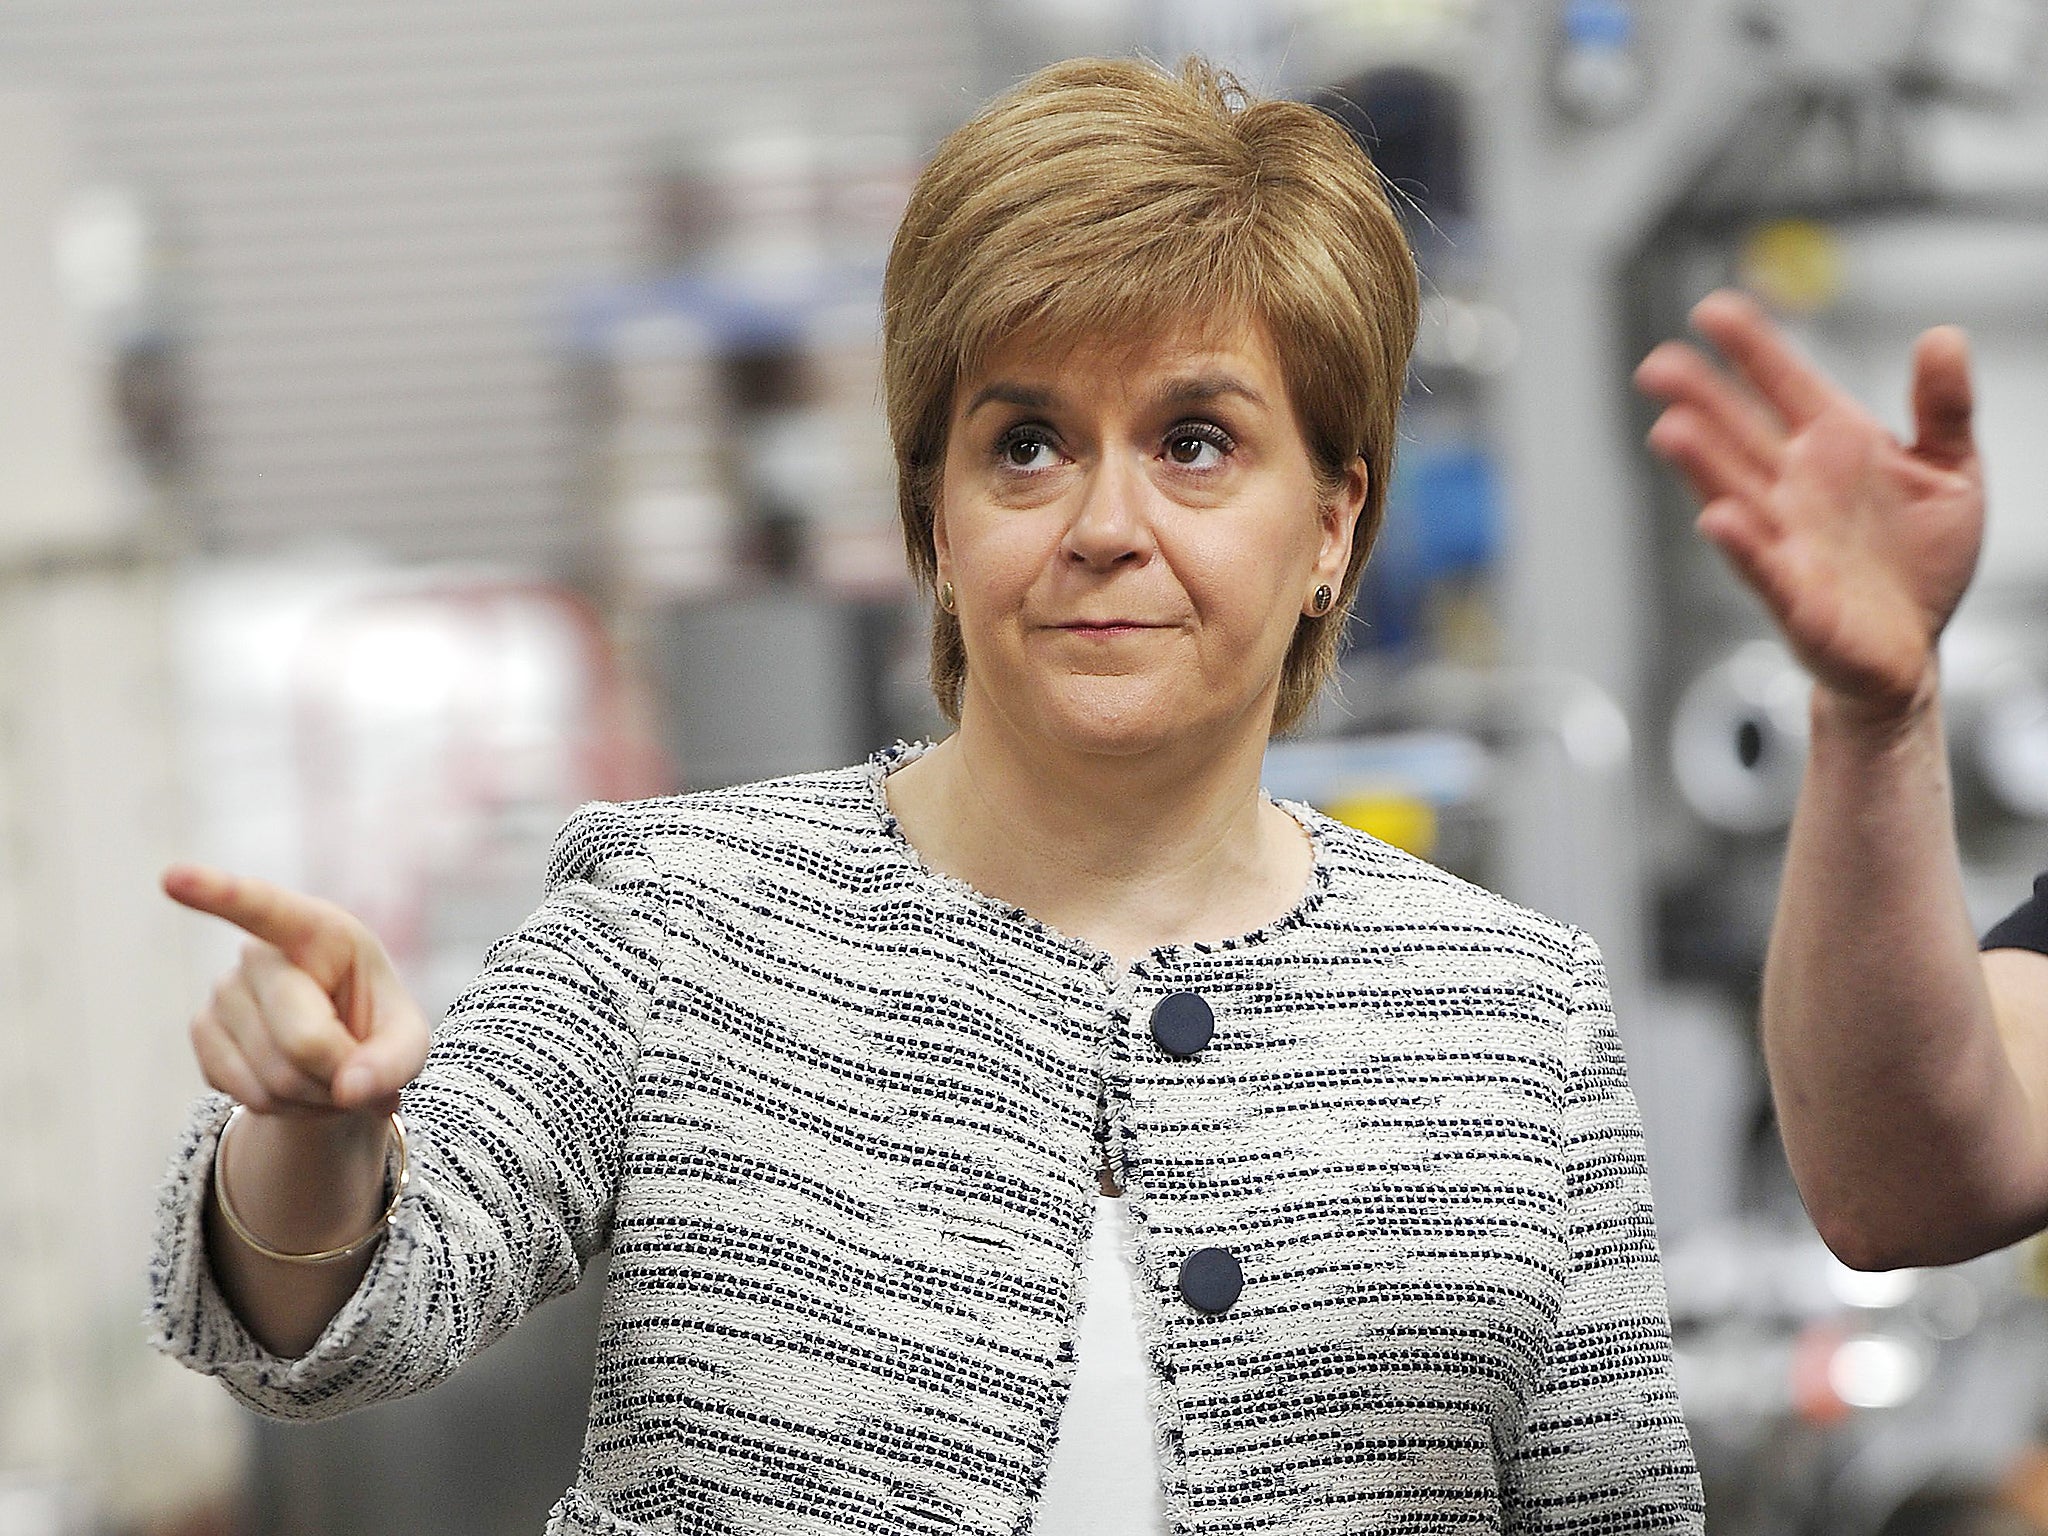 Ms Sturgeon claims her party has already implemented Labour and Tory proposals over last 10 years